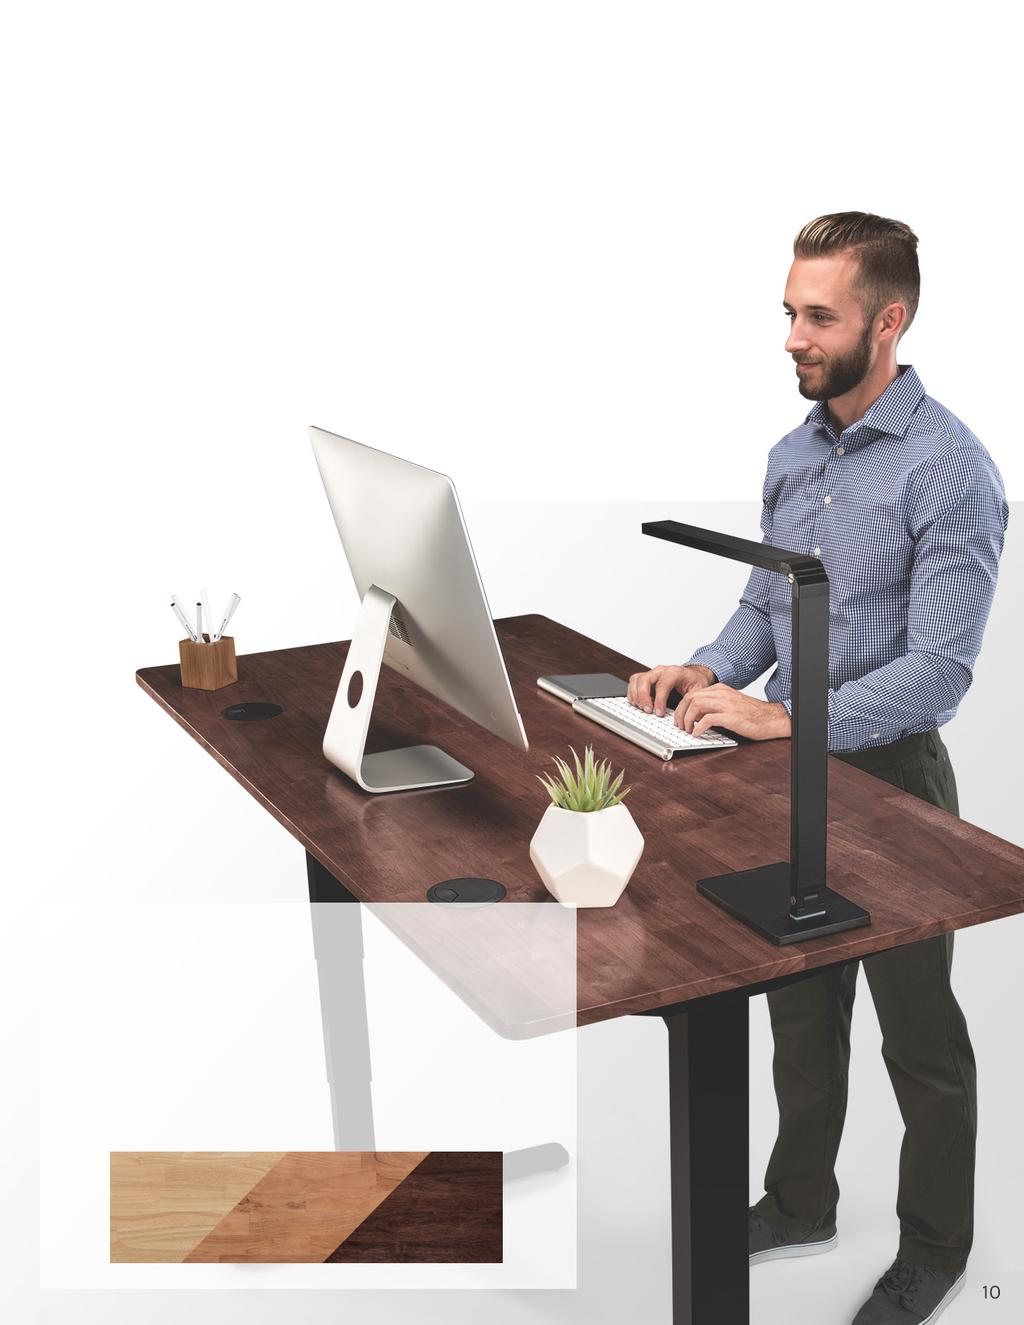 Tough Desk, Nice Exterior By choosing a rubberwood desktop, you re making the greener choice without sacrificing style or strength.